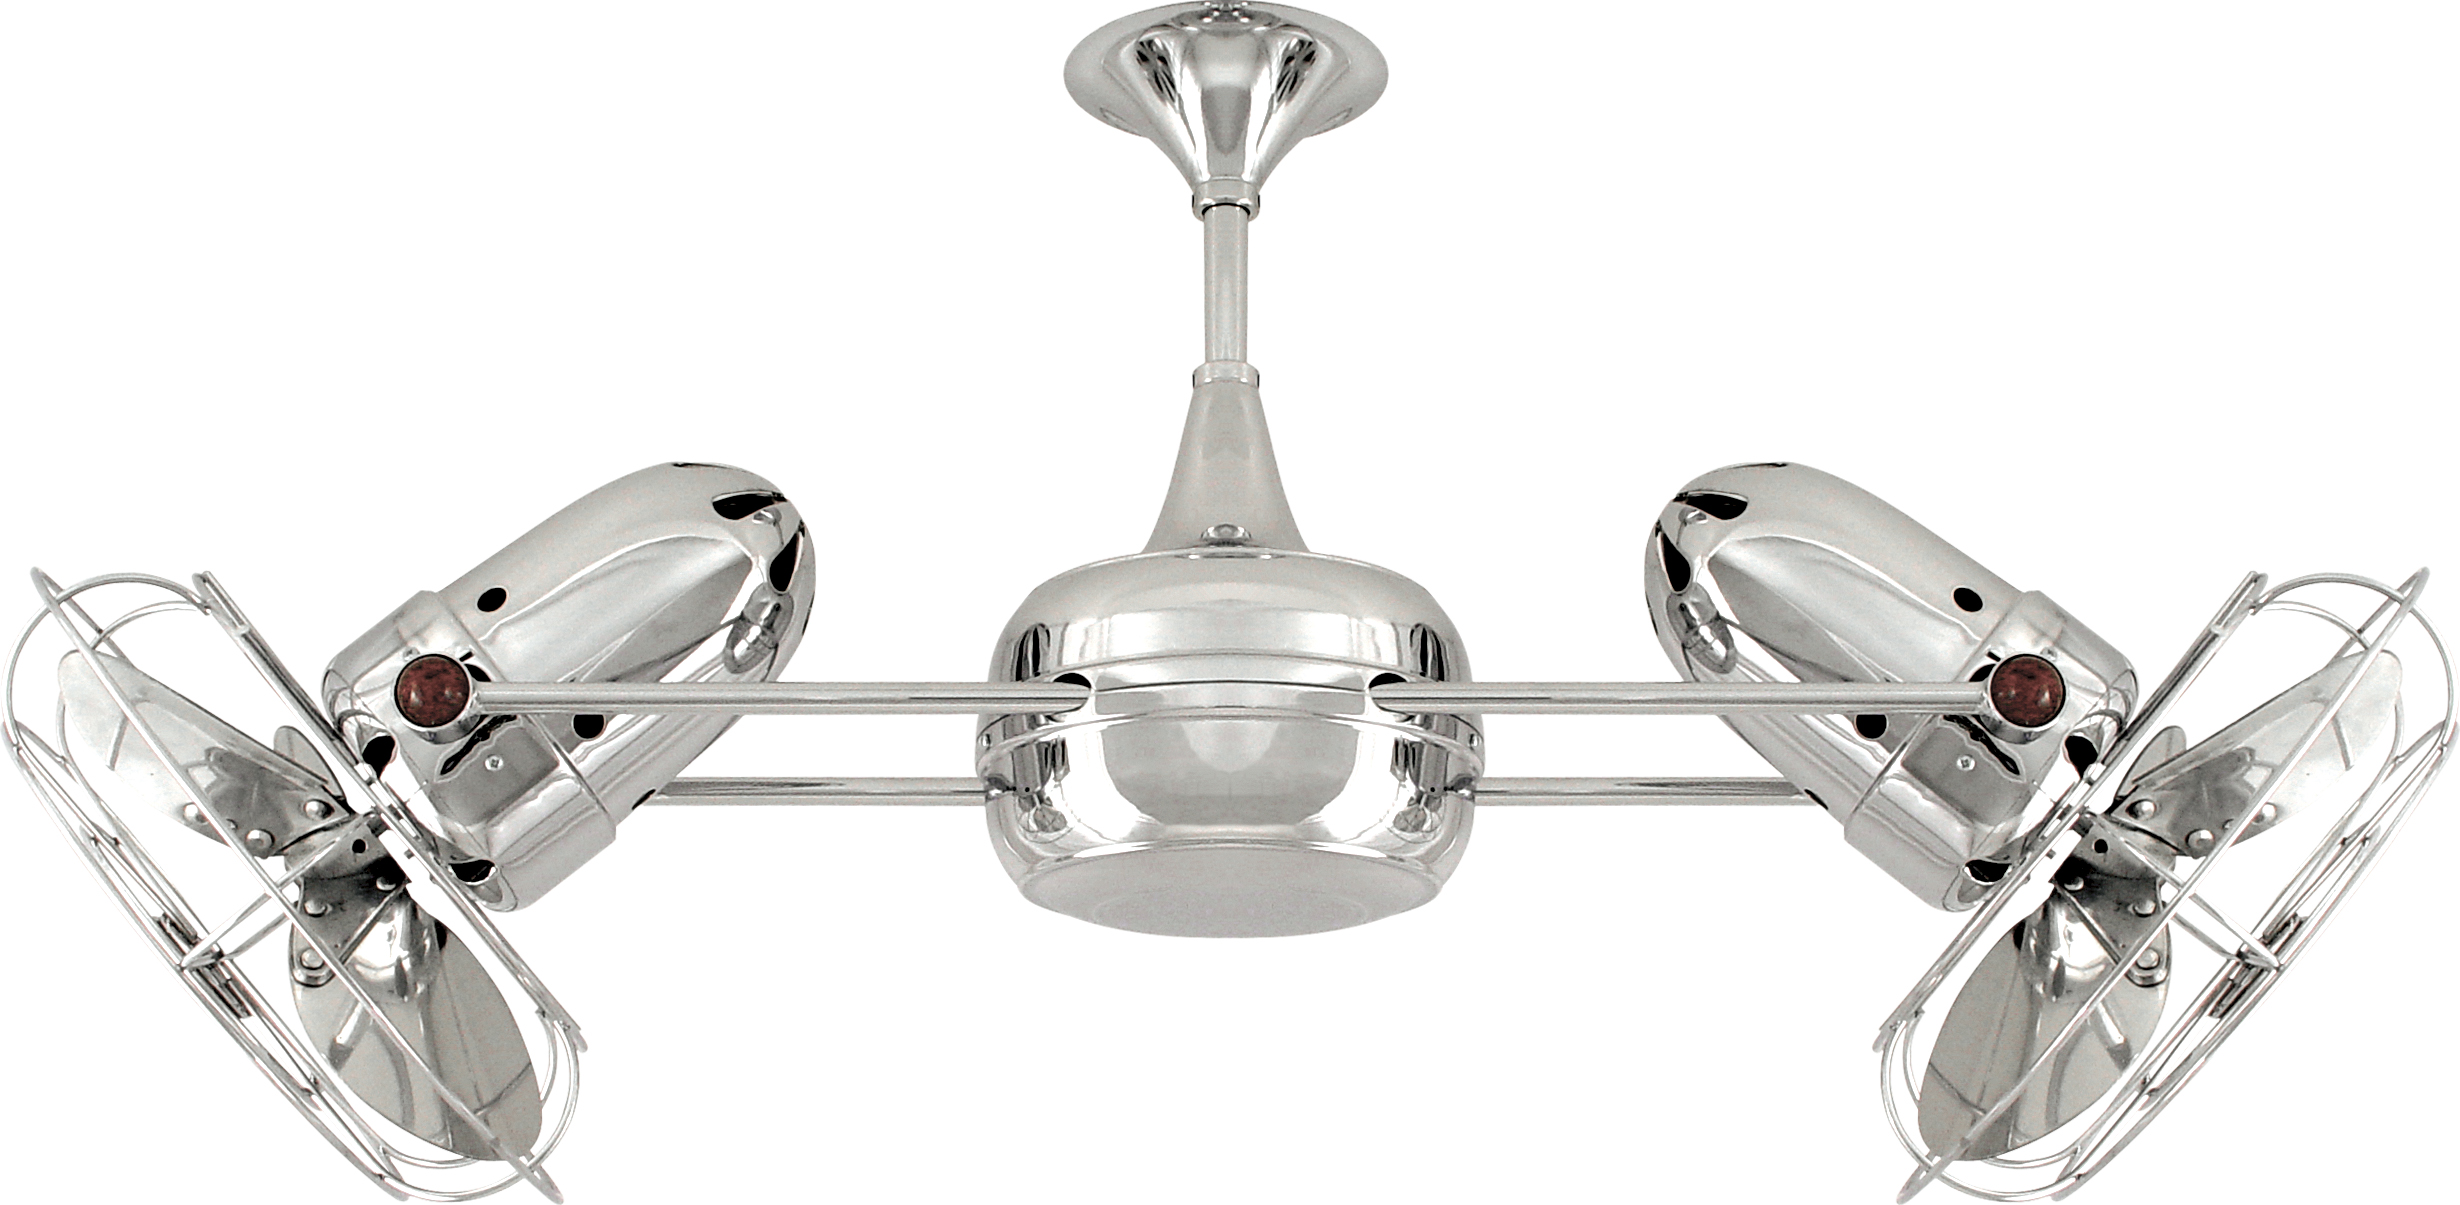 Duplo Dinamico rotational dual head ceiling fan in Polished Chrome finish with Metal blades made by Matthews Fan Company.